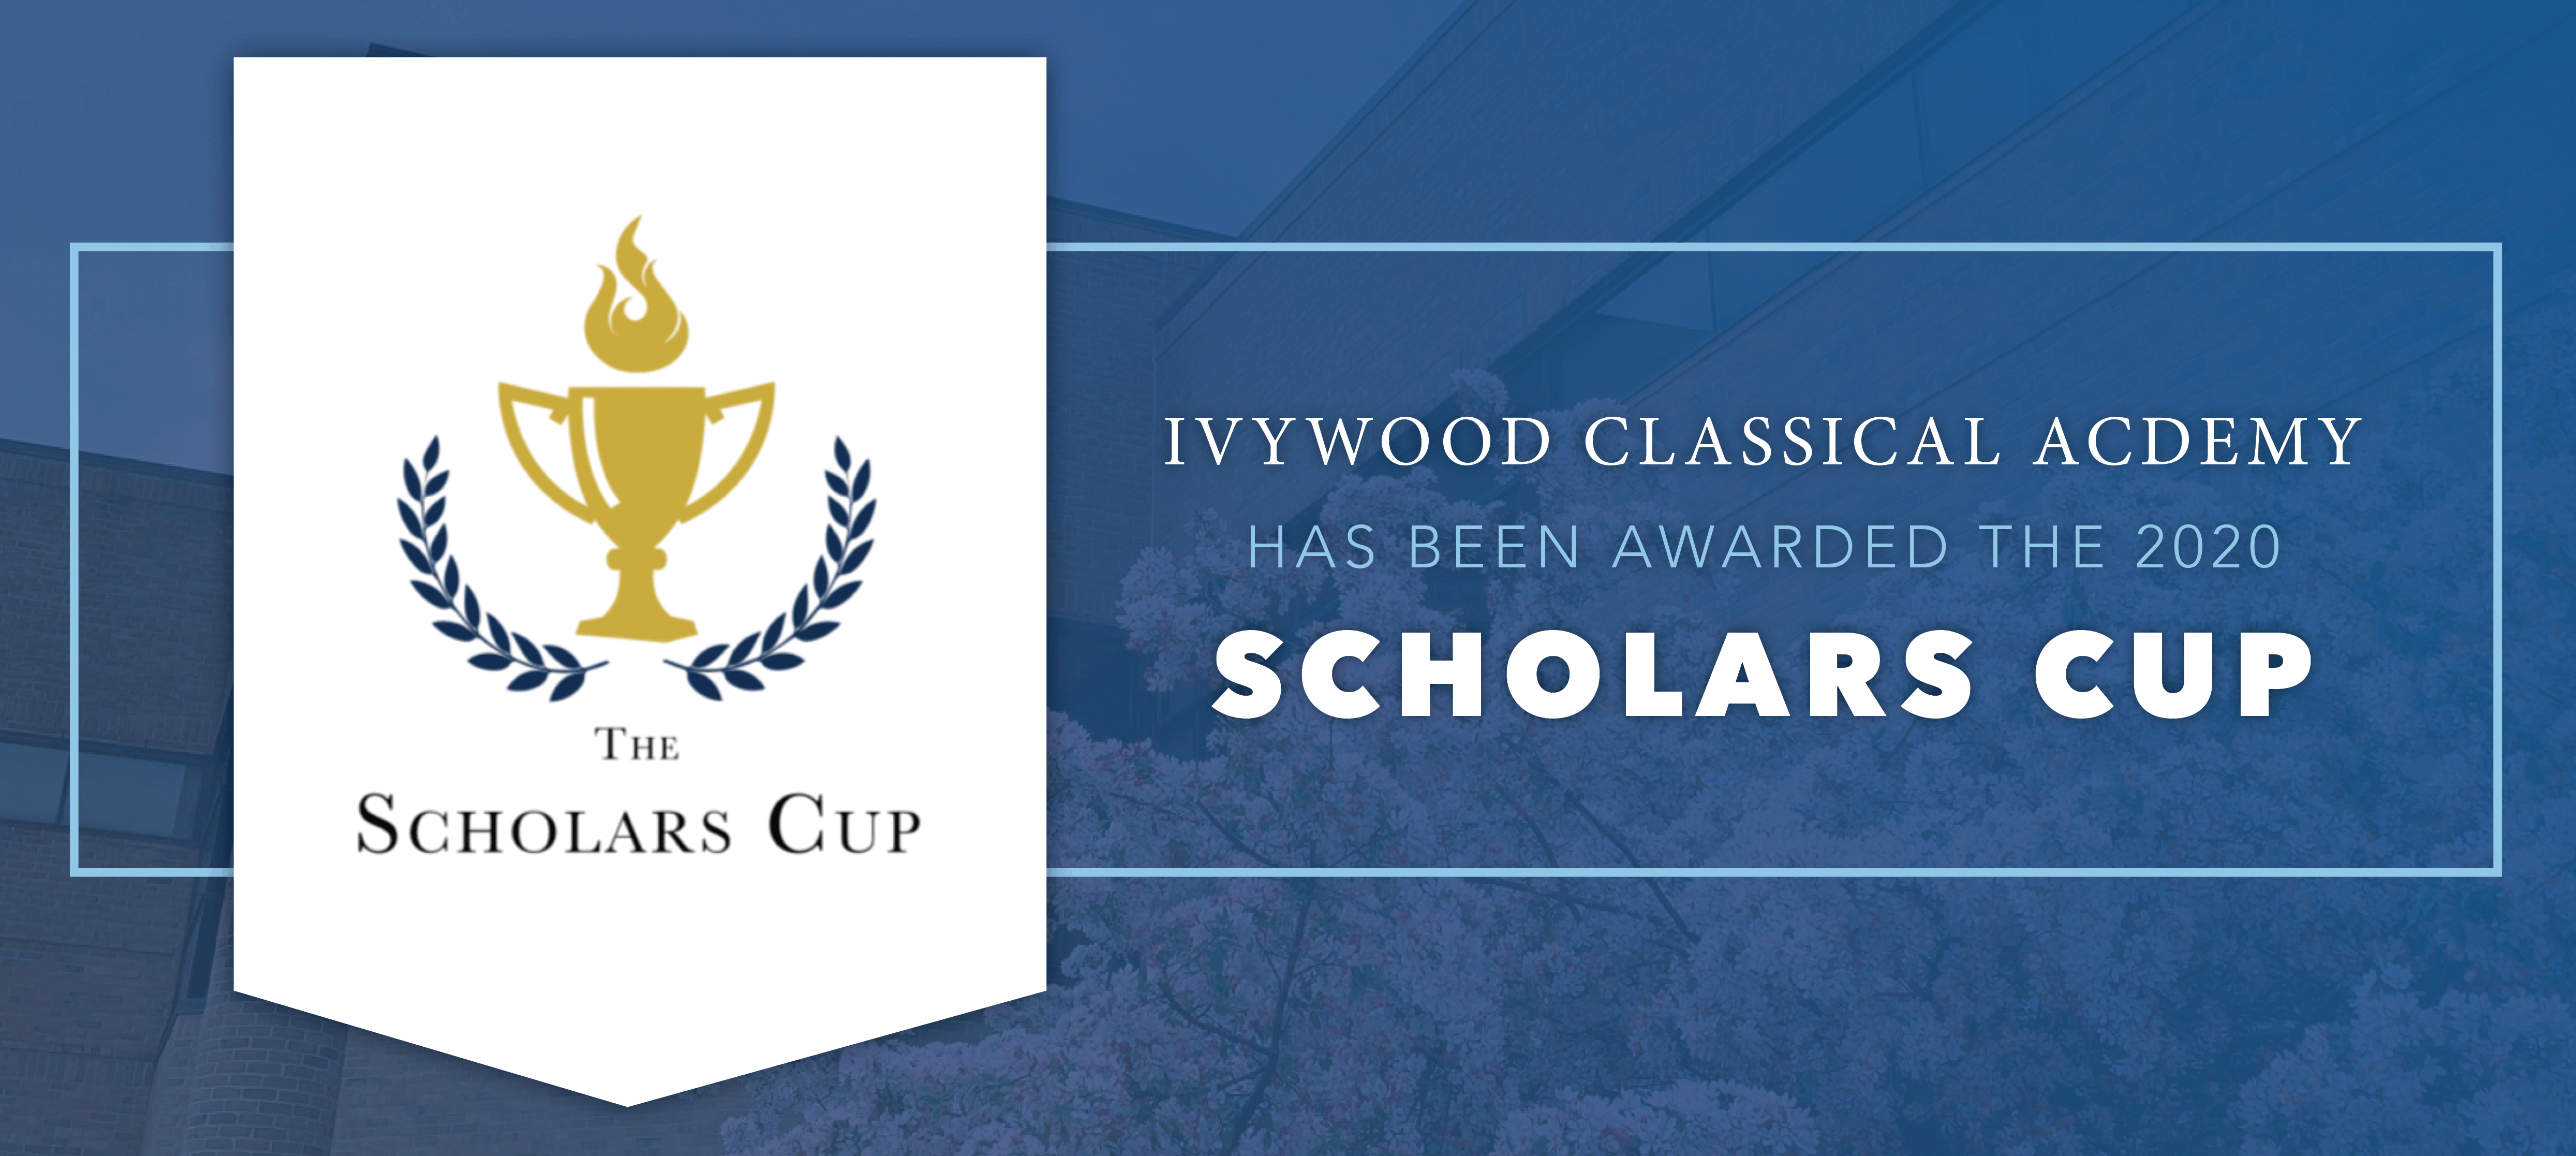 Ivywood Classical Academy has been awarded the Scholar's Cup